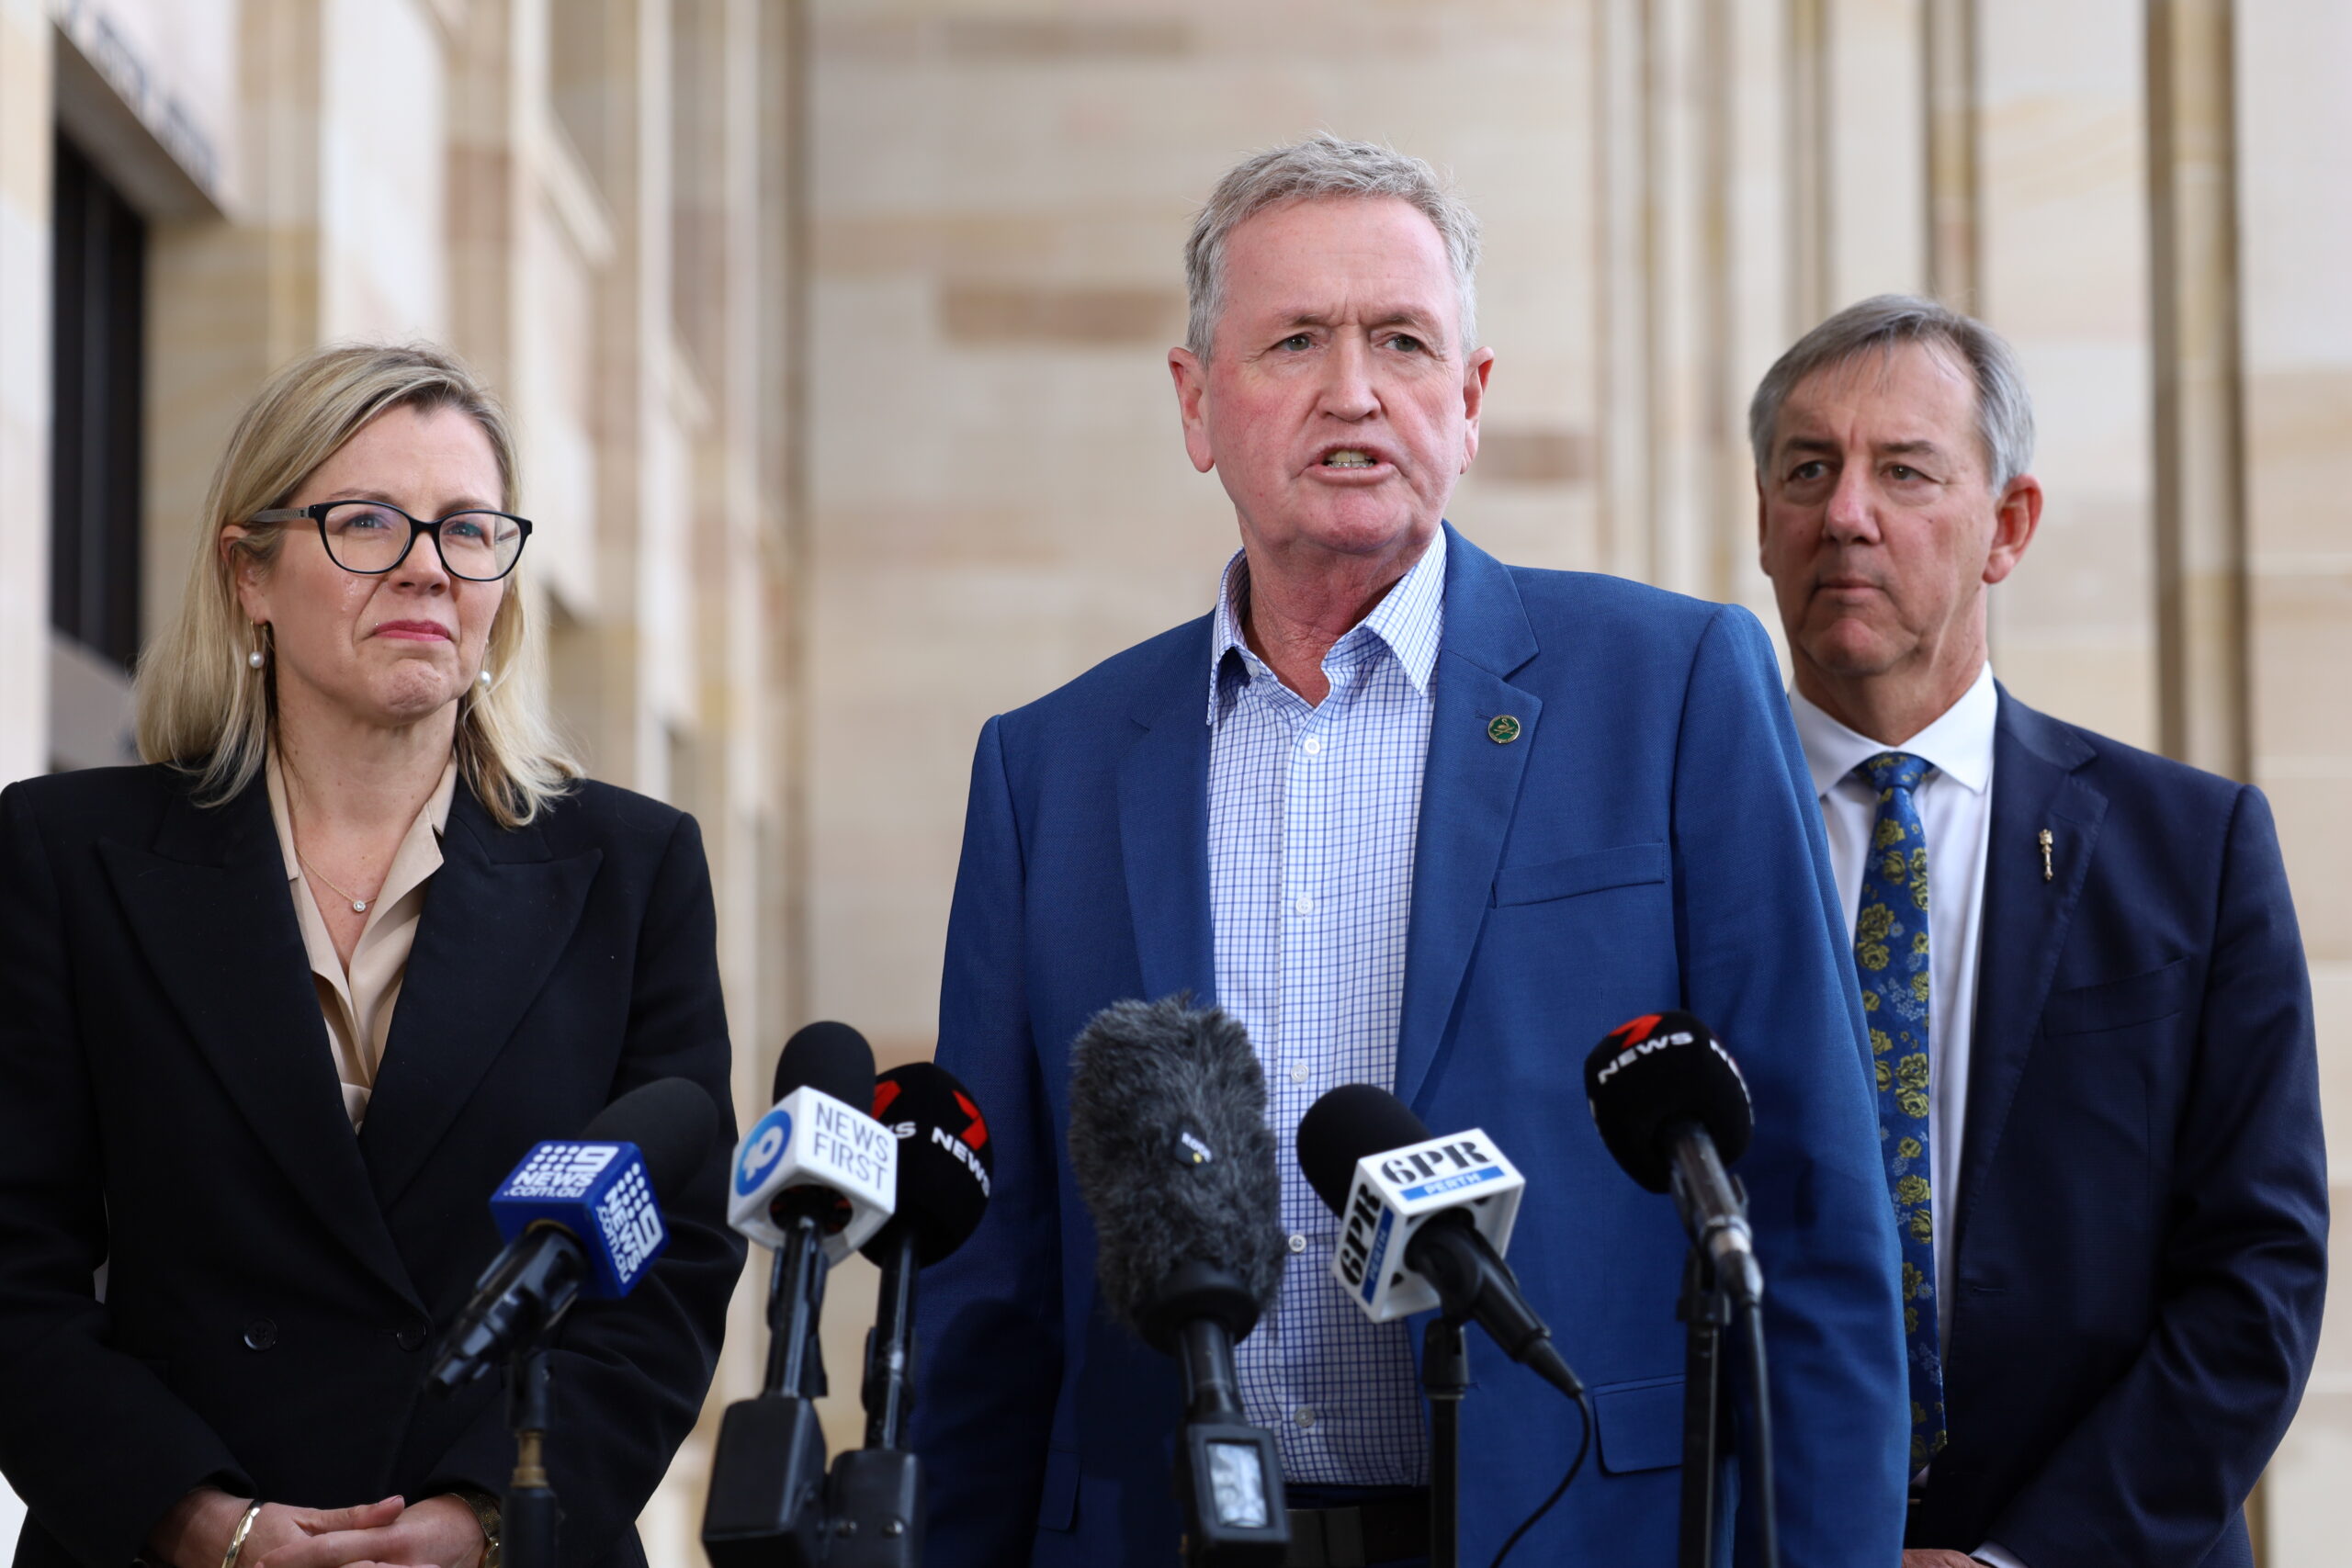 National Liberal Opposition Alliance Call On Wa Labor To Come Clean Over Botched Act